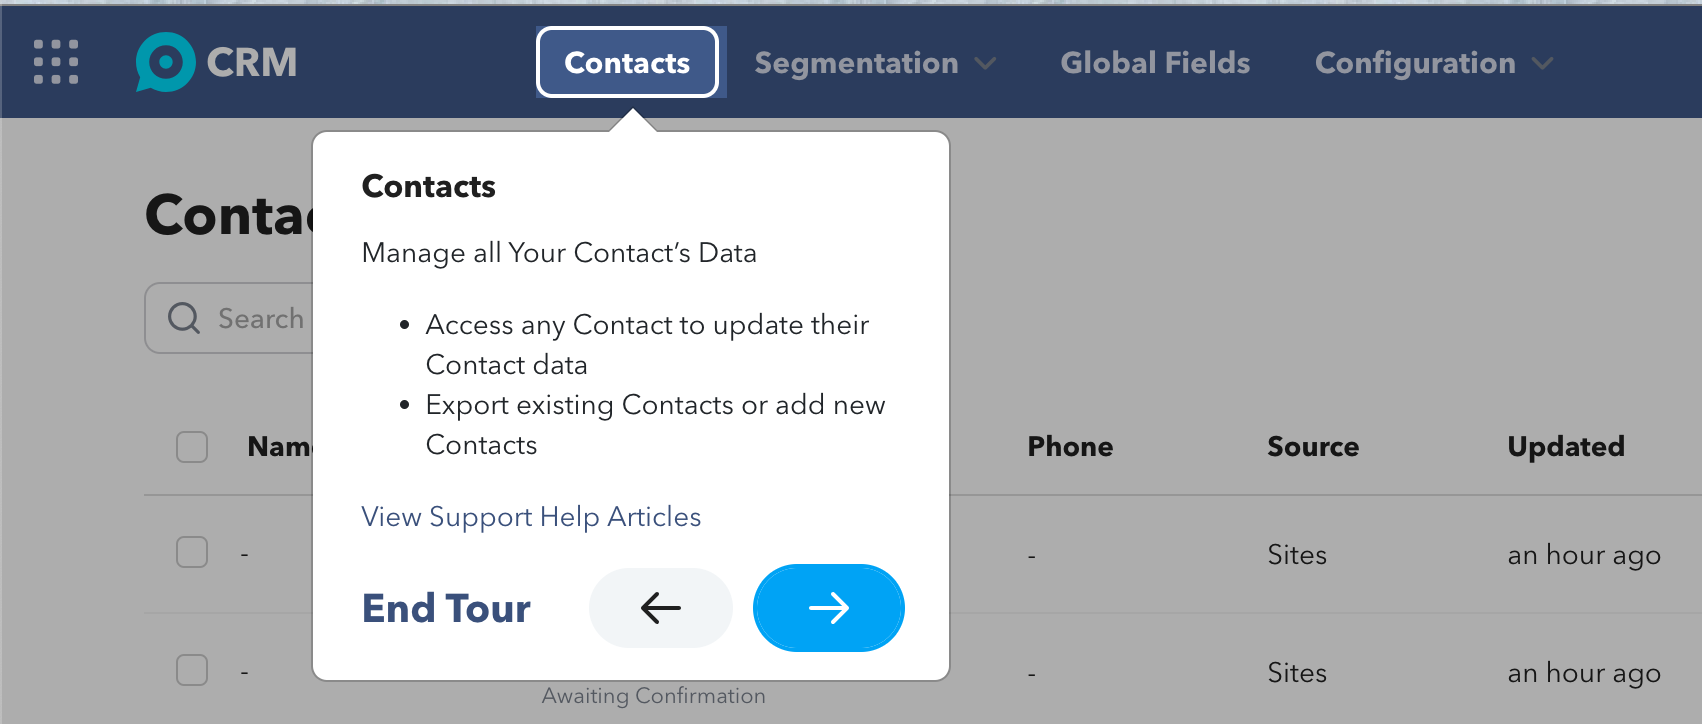 TruVISIBILITY CRM Contacts section